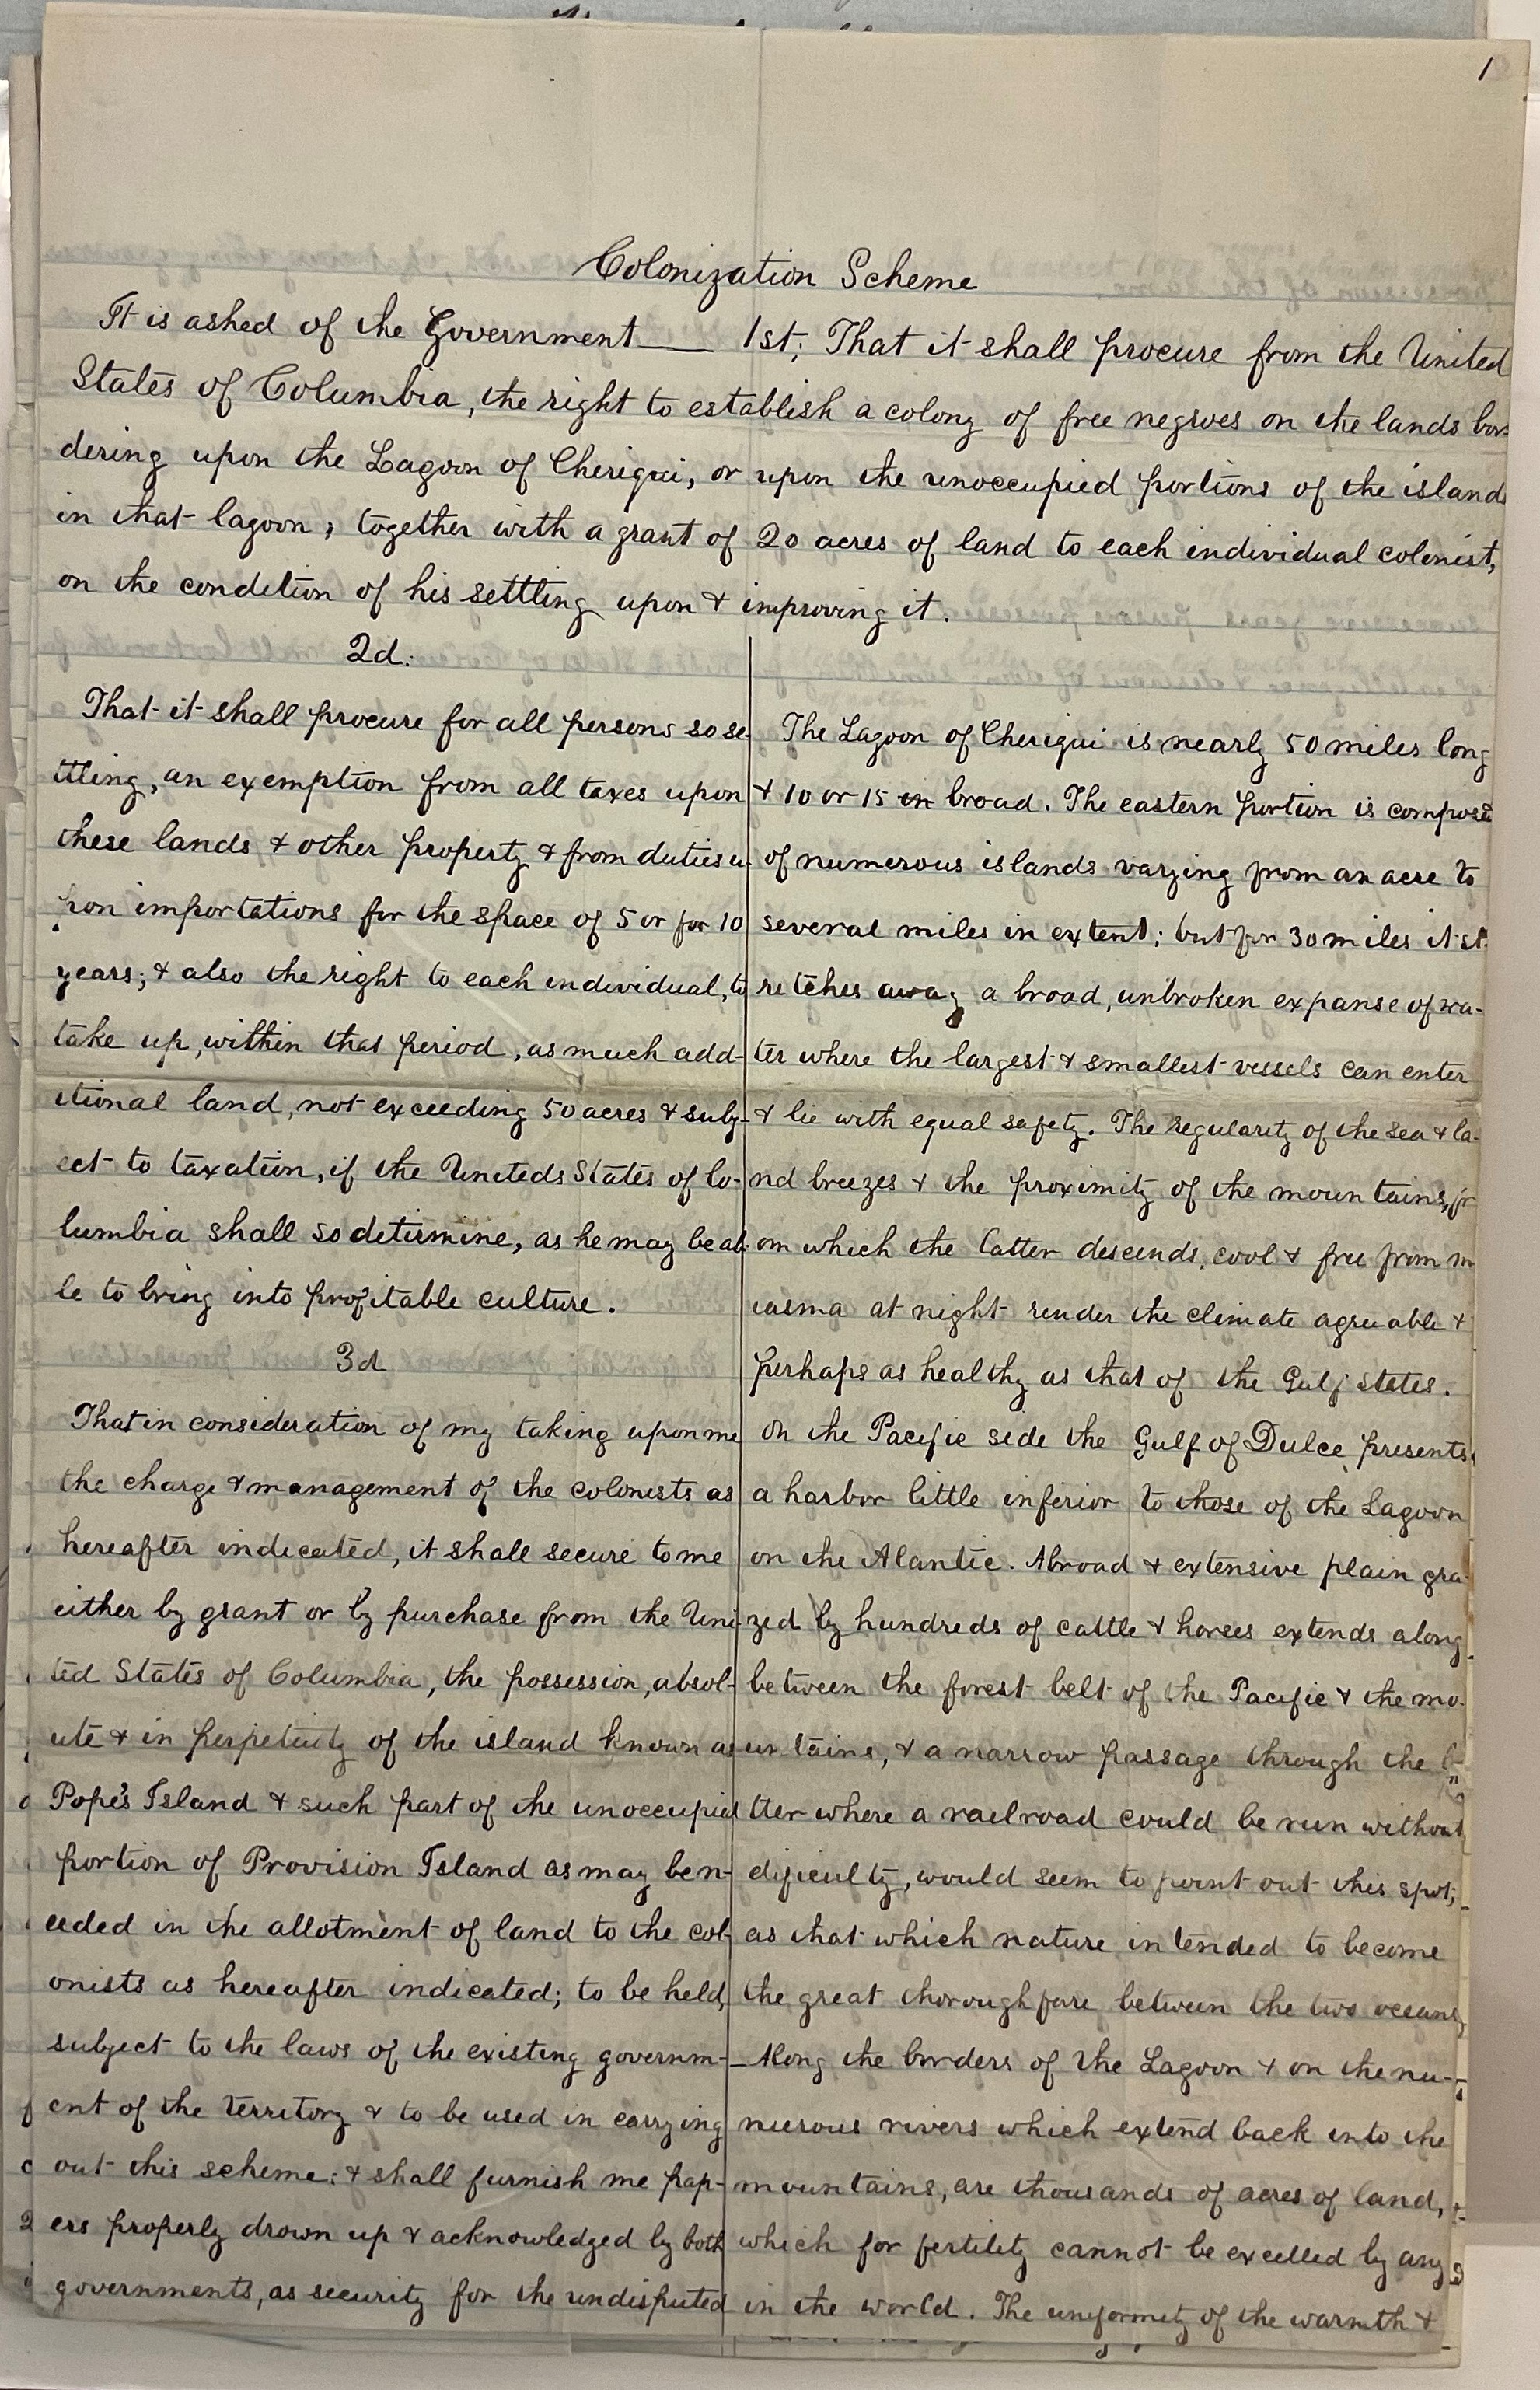 Report of the purpose and estimated expenses of the Chiriqui Colonization plan during Lincoln's first term as President. It was an attempt to colonize African Americans in Central America. | Credit Samuel Davis, Ph.D.